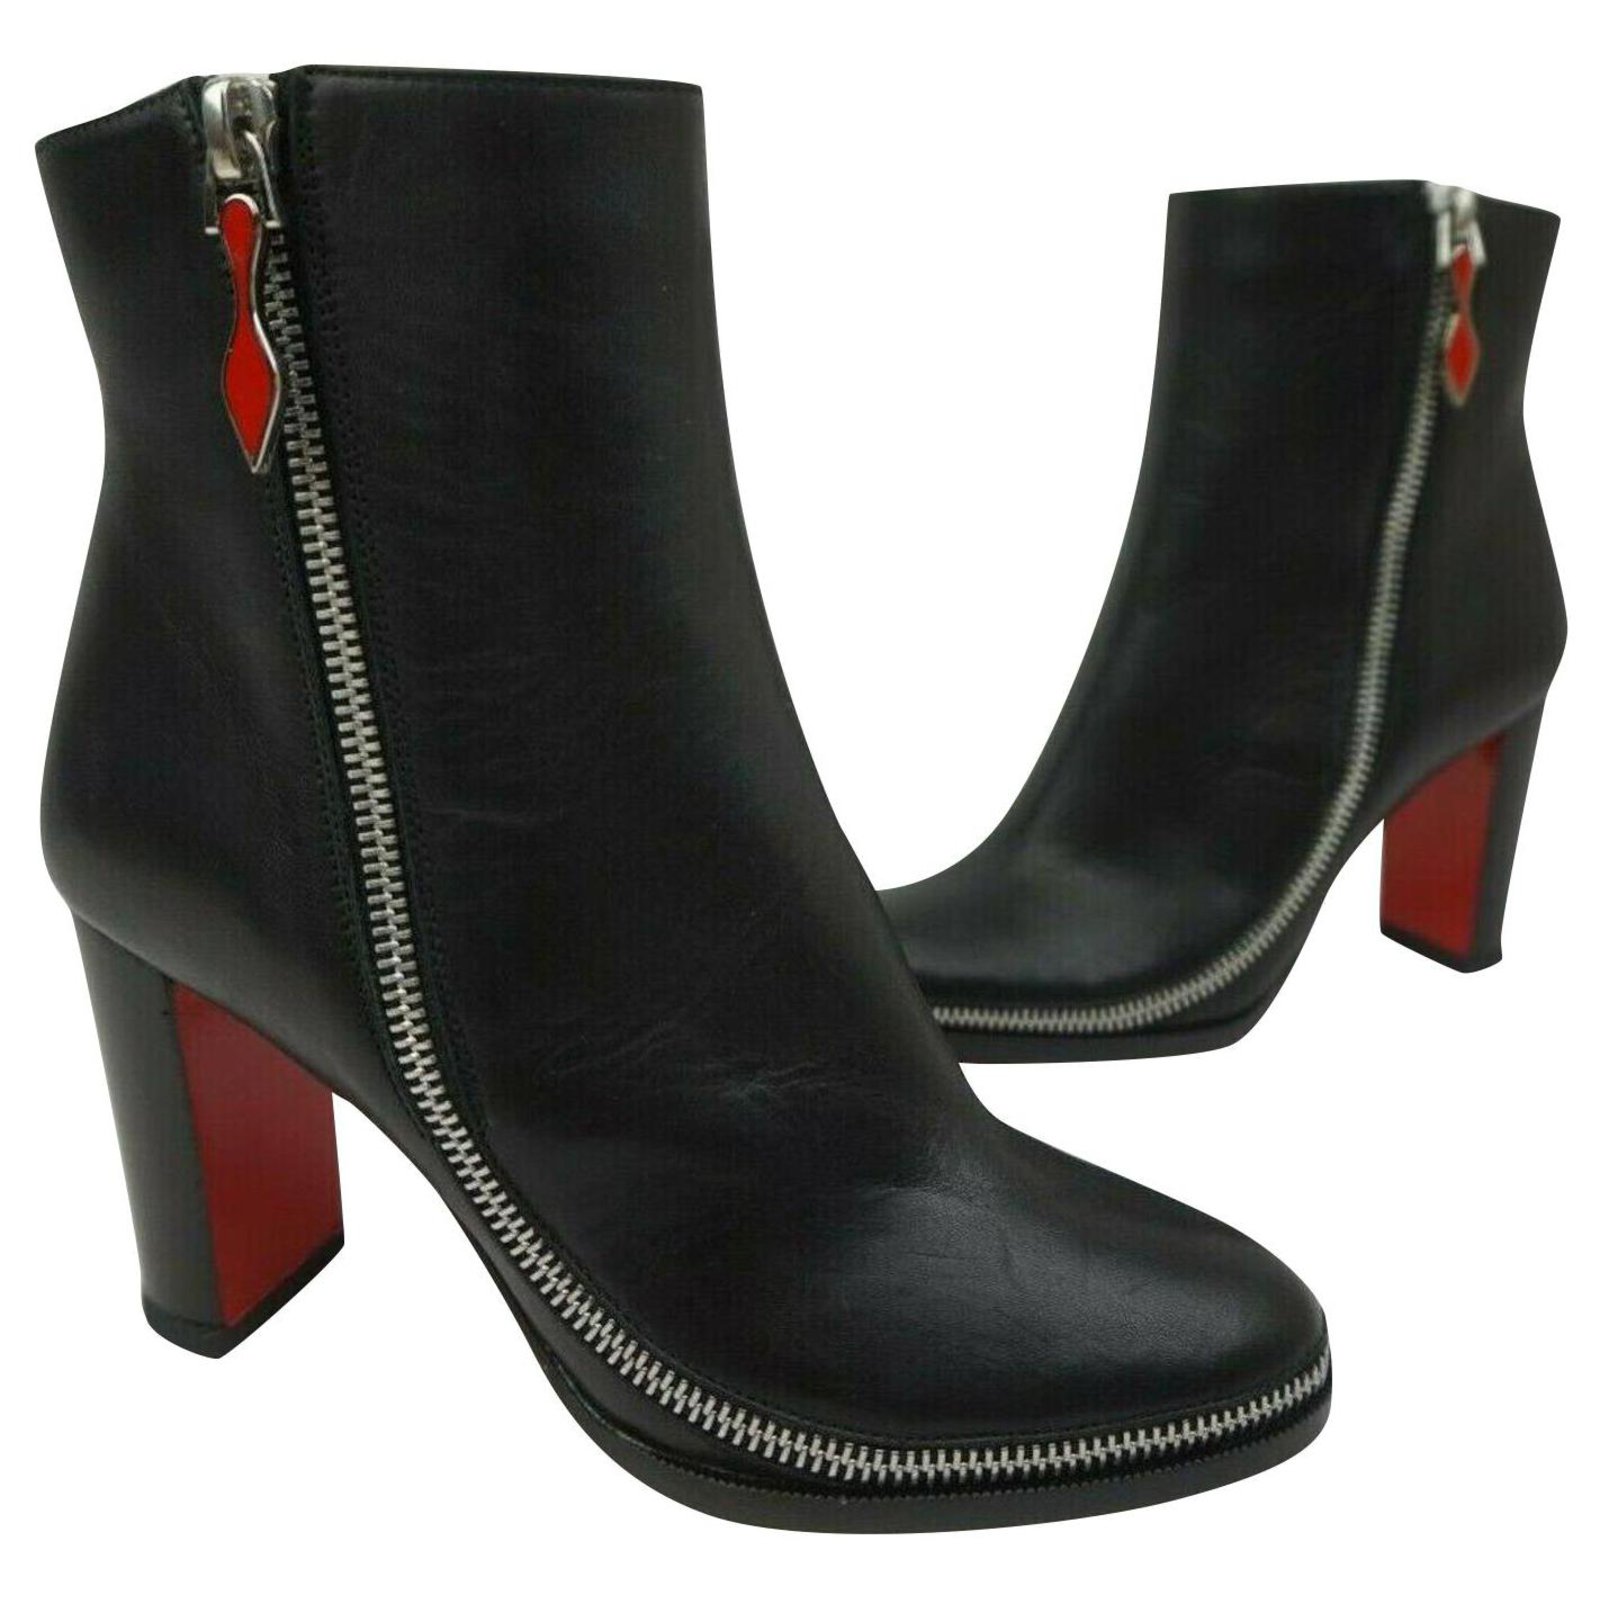 Leather ankle boots Christian Louboutin Black size 40 EU in